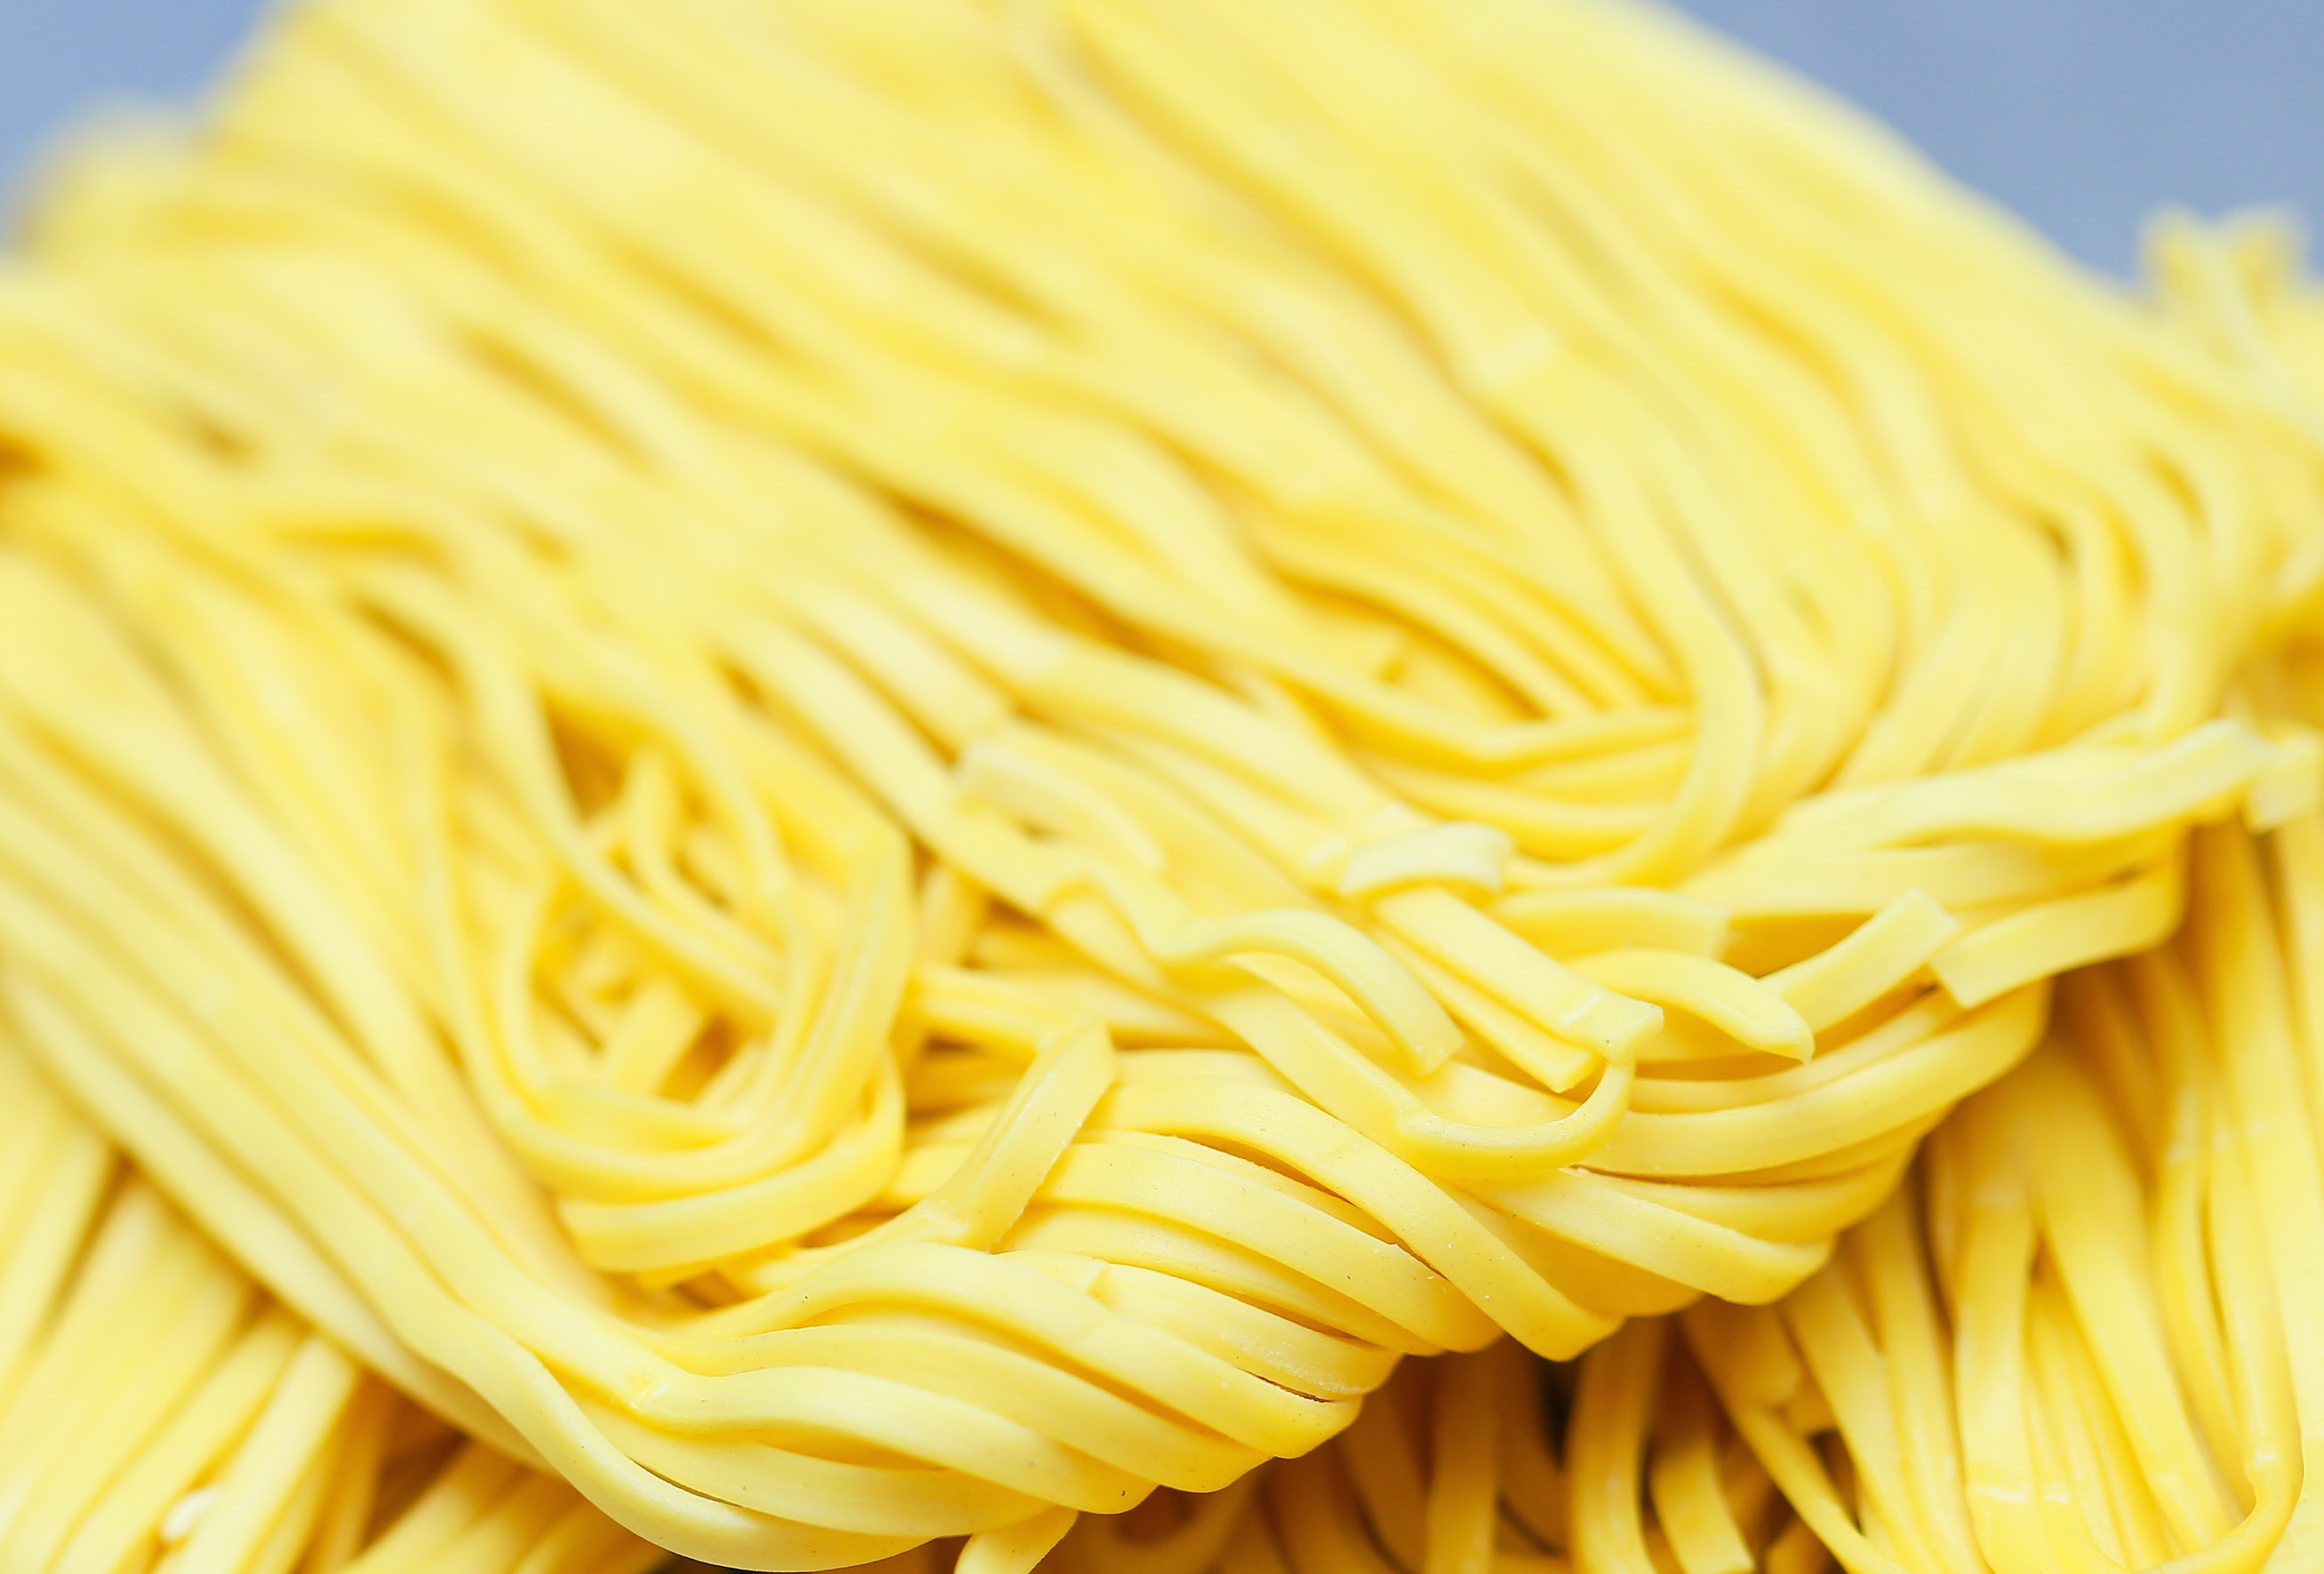 How to Measure Dry Pasta: 8 Steps (with Pictures) - wikiHow